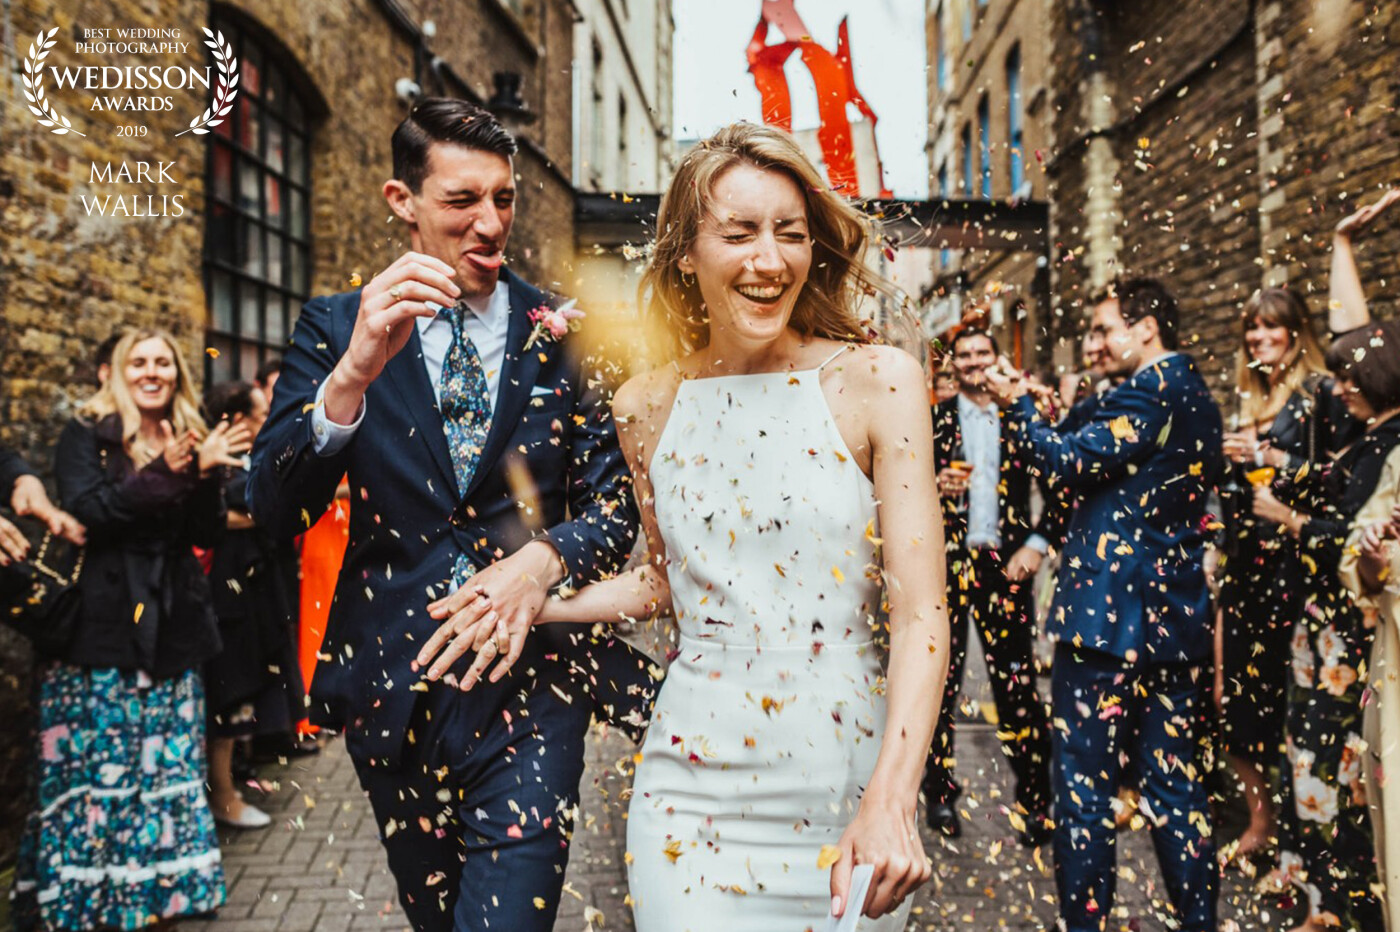 This was Liv & Matt's second lot of confetti having chosen to run the gauntlet again at the start of their evening reception at First Option Location Studio in Hackney, London. Matt is experiencing the downside to the combination of a big, open-mouthed smile, and light and floaty biodegradable confetti.